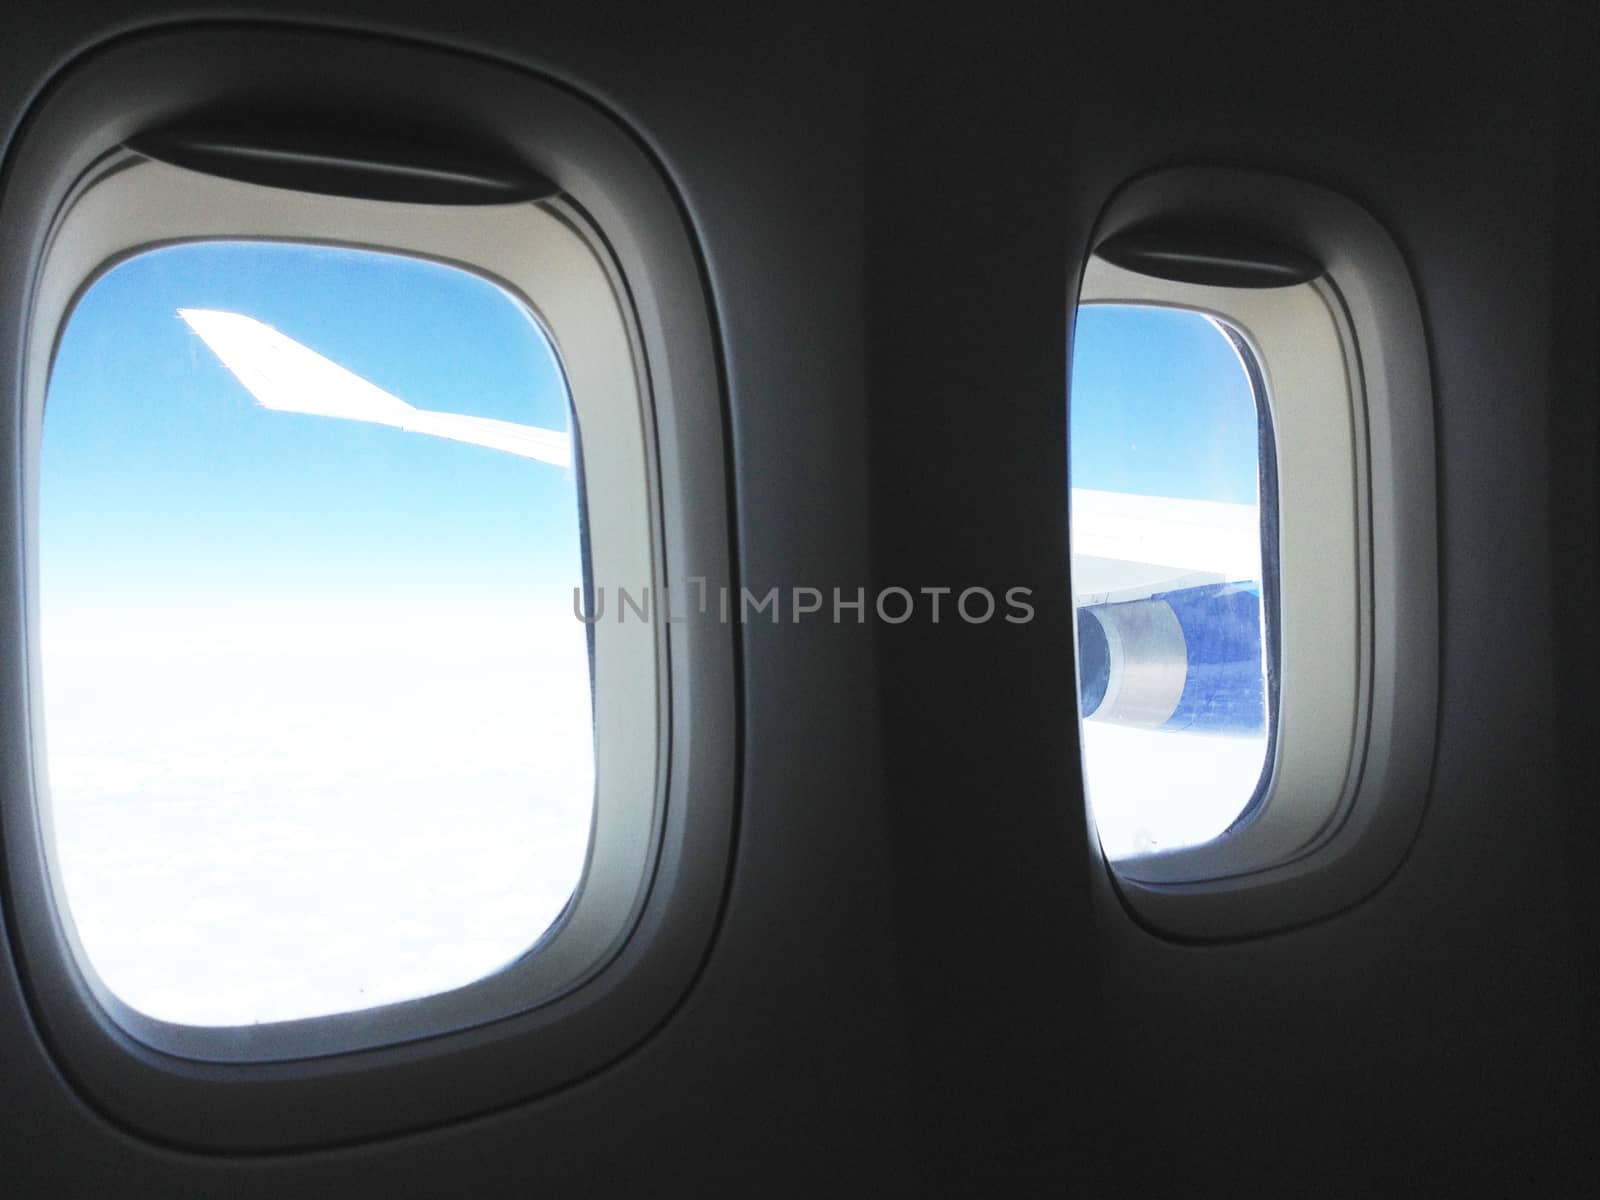 The view from the airplane on the wing, flying over the clouds. The concept of traveling by plane by claire_lucia